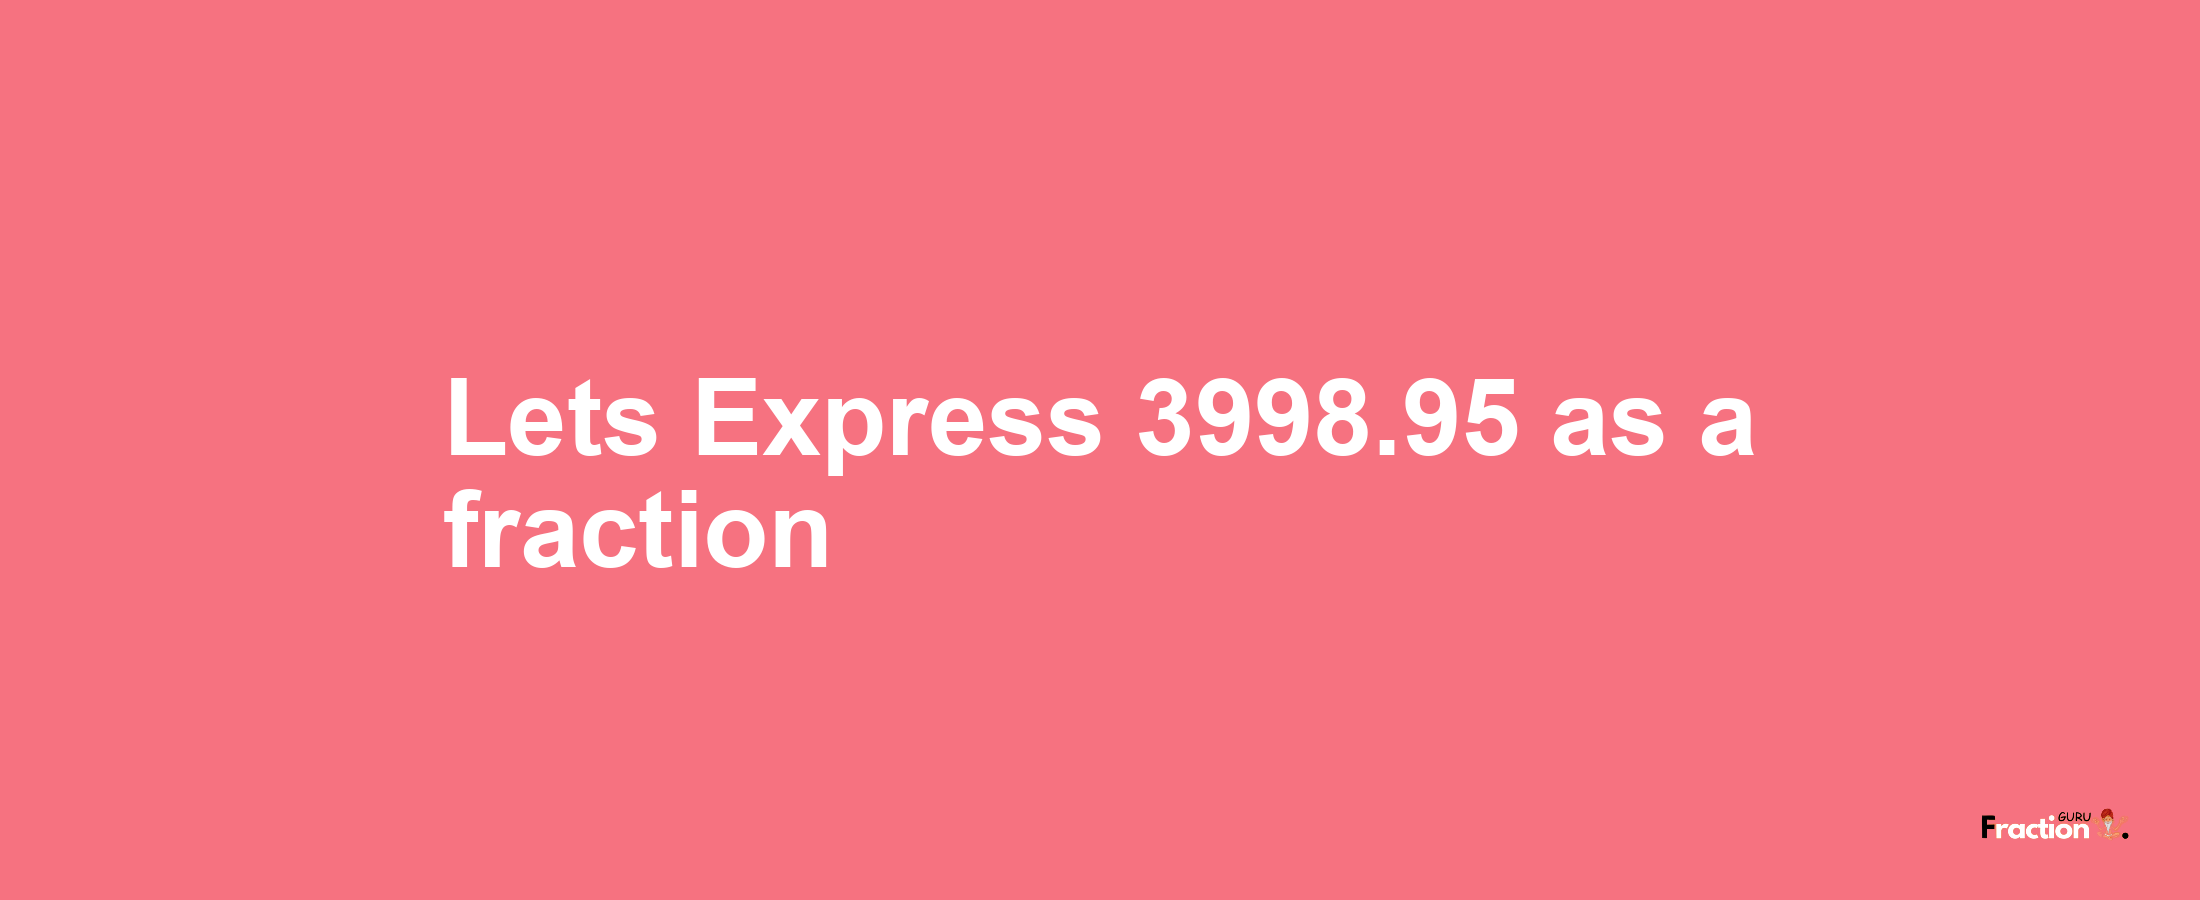 Lets Express 3998.95 as afraction